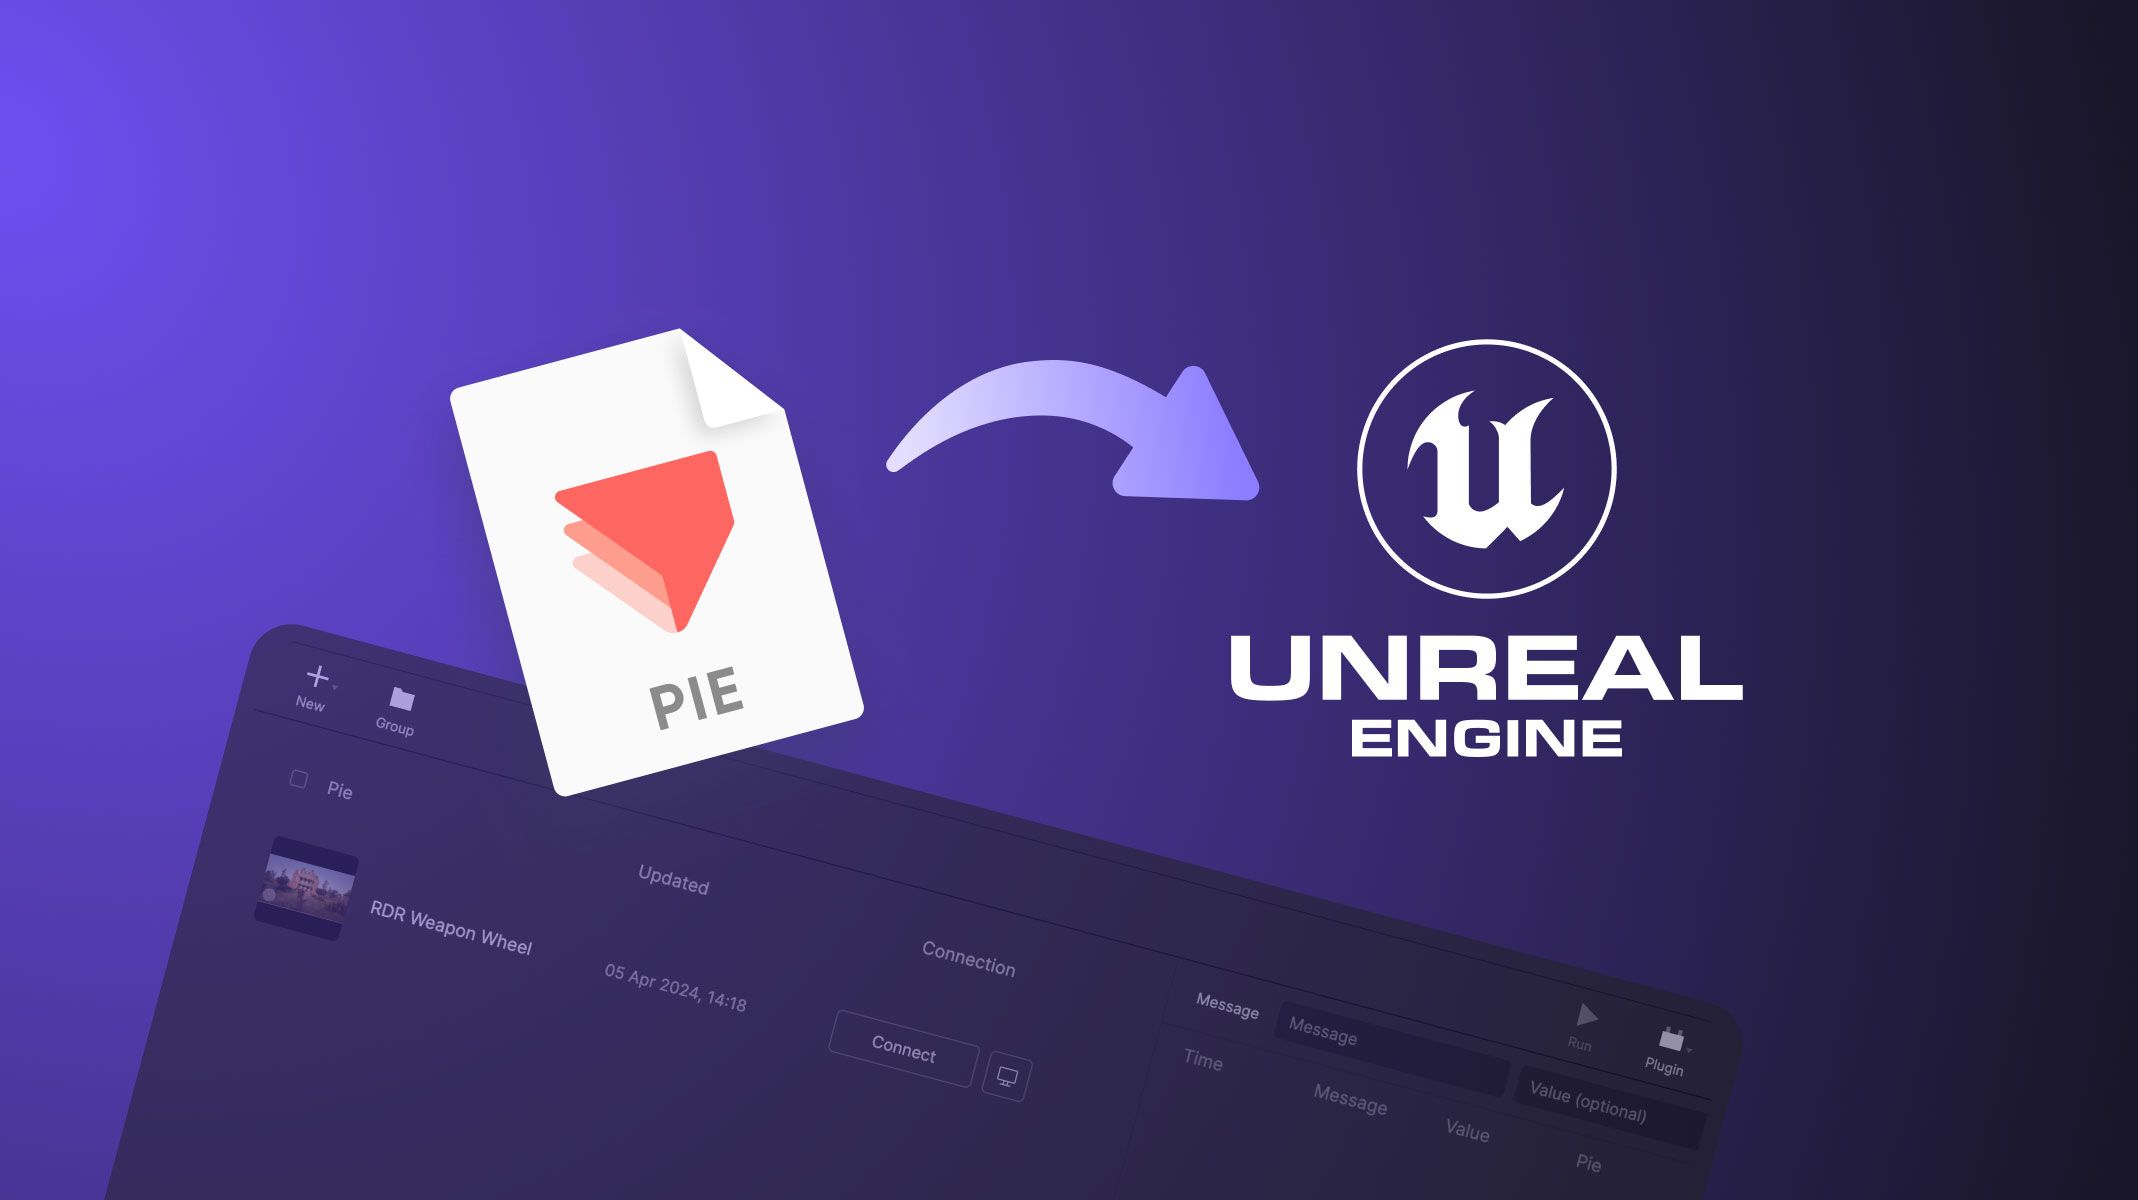 integrating ProtoPie prototypes with Unreal Engine